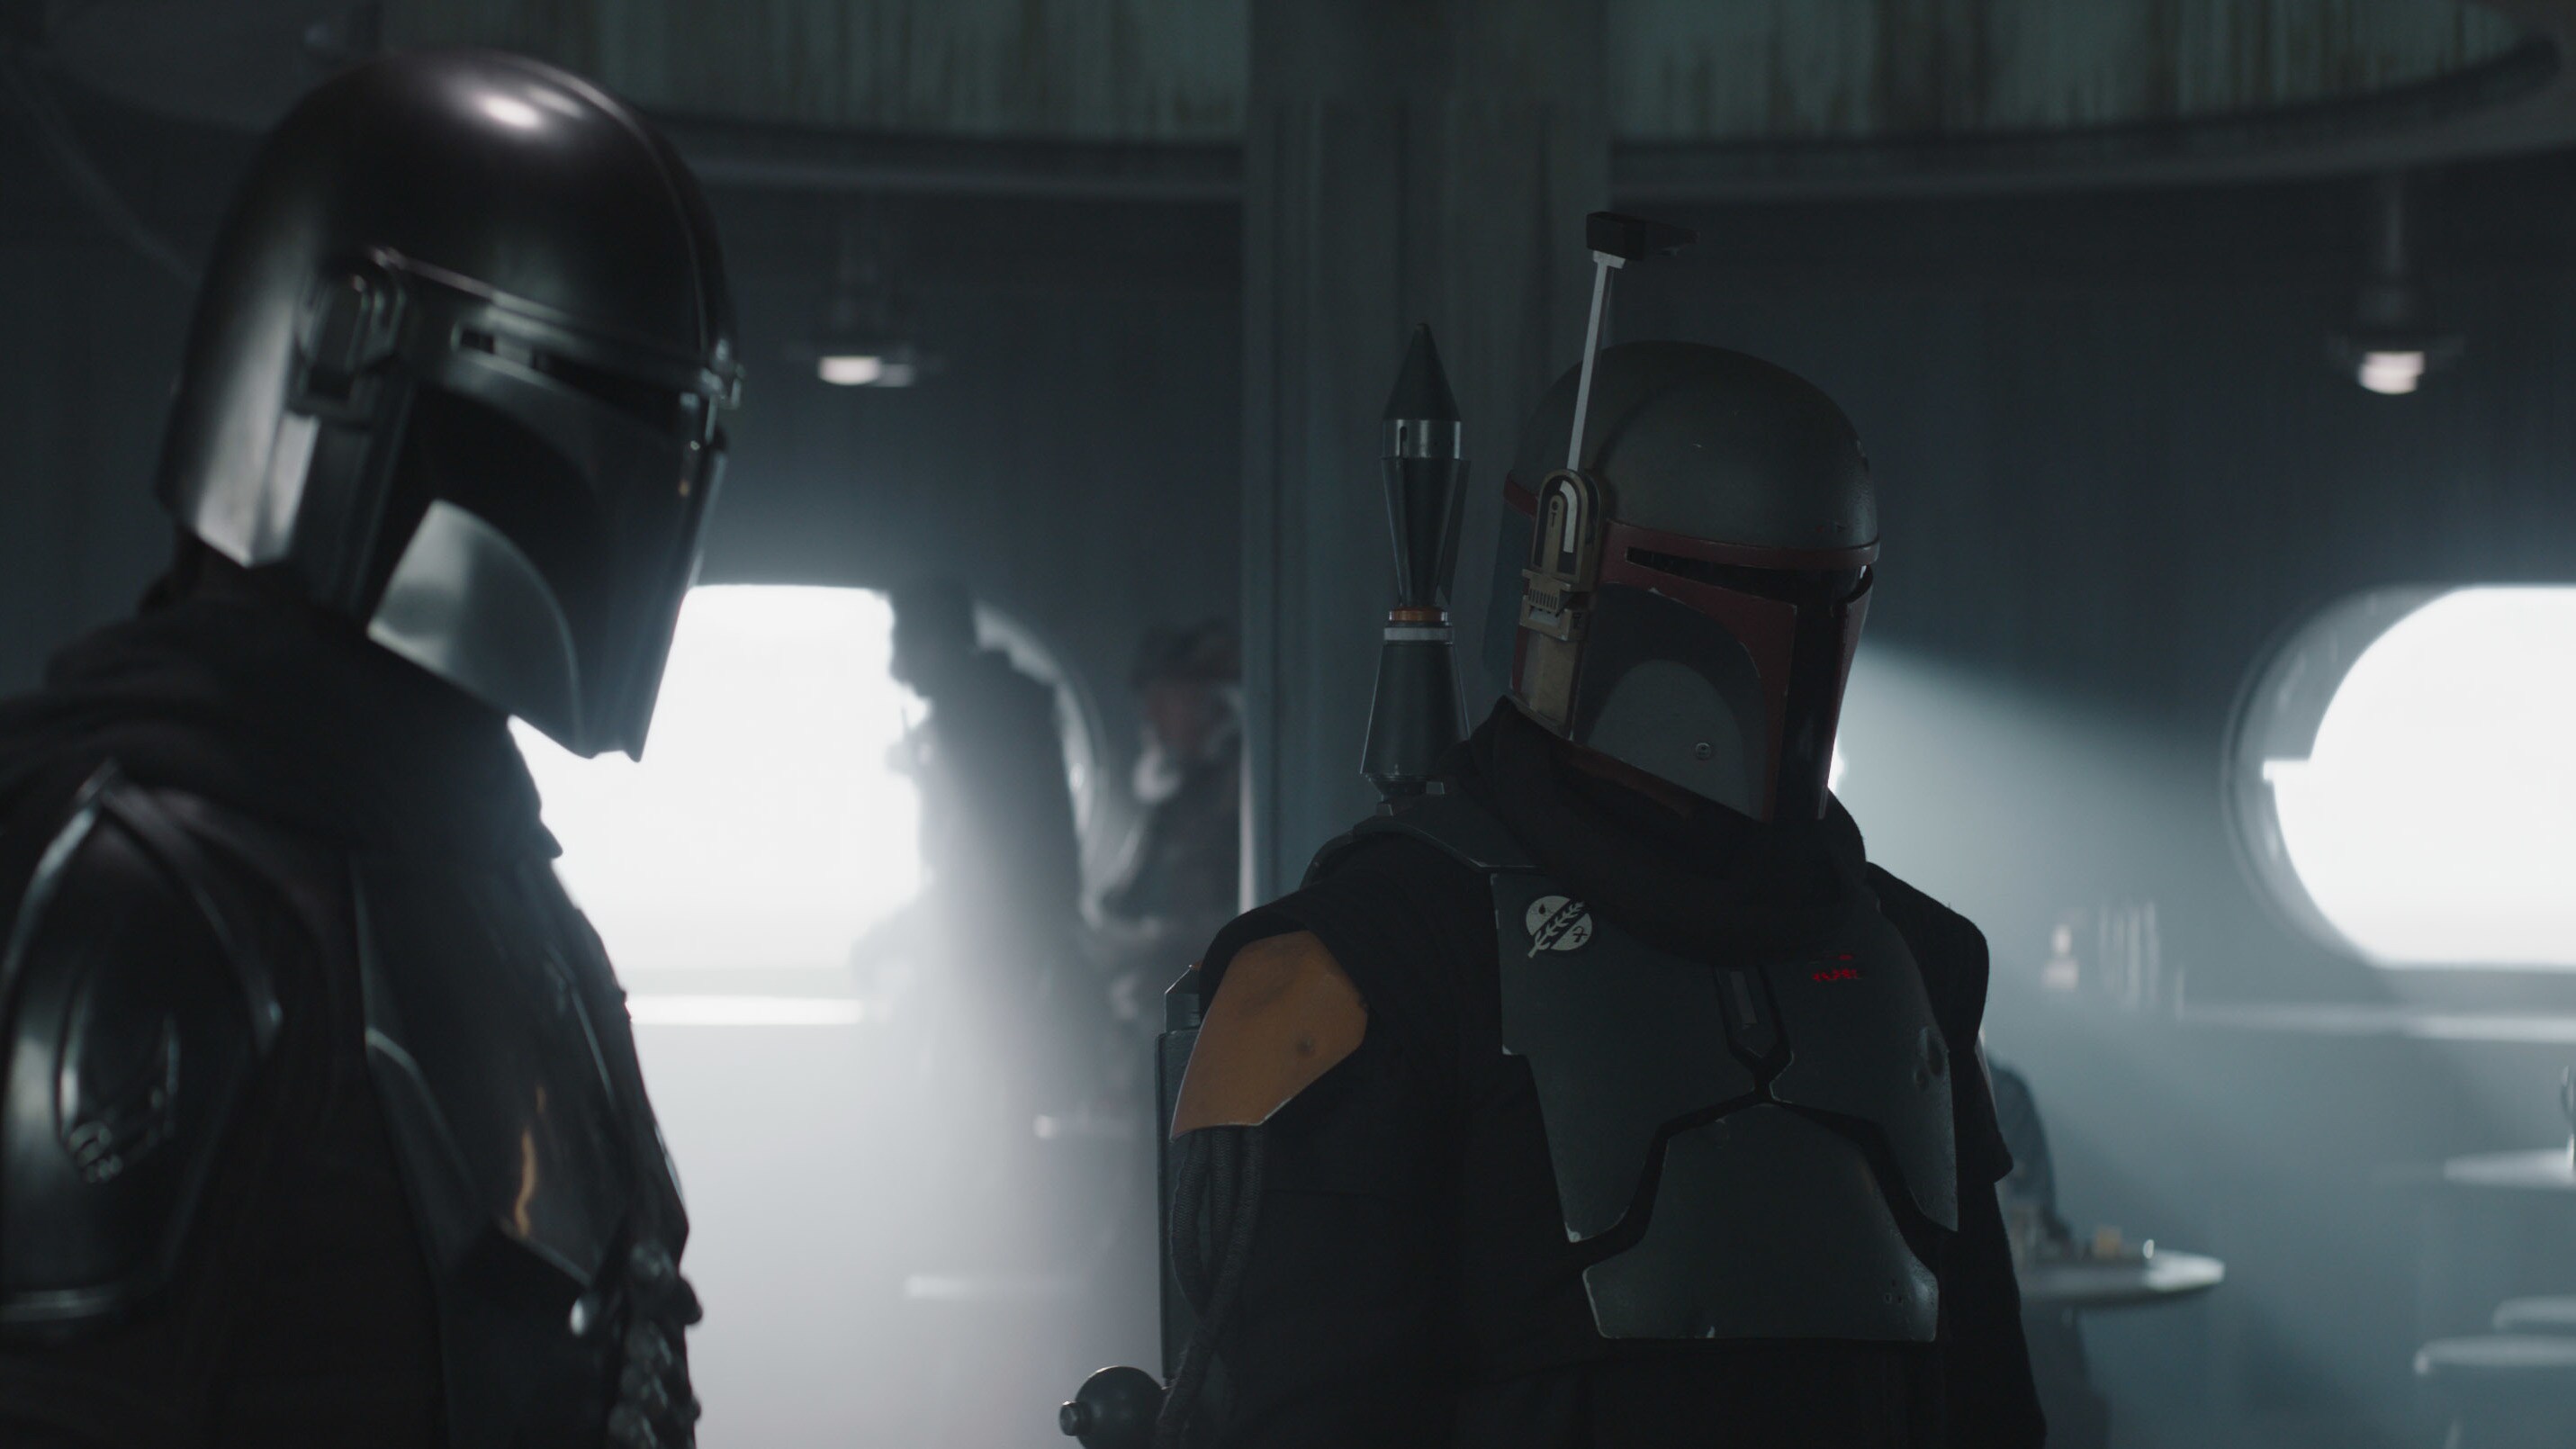 (L-R): The Mandalorian (Pedro Pascal) and Boba Fett (Temuera Morrison) in Lucasfilm's THE MANDALORIAN, season two, exclusively on Disney+. © 2020 Lucasfilm Ltd. & ™. All Rights Reserved.